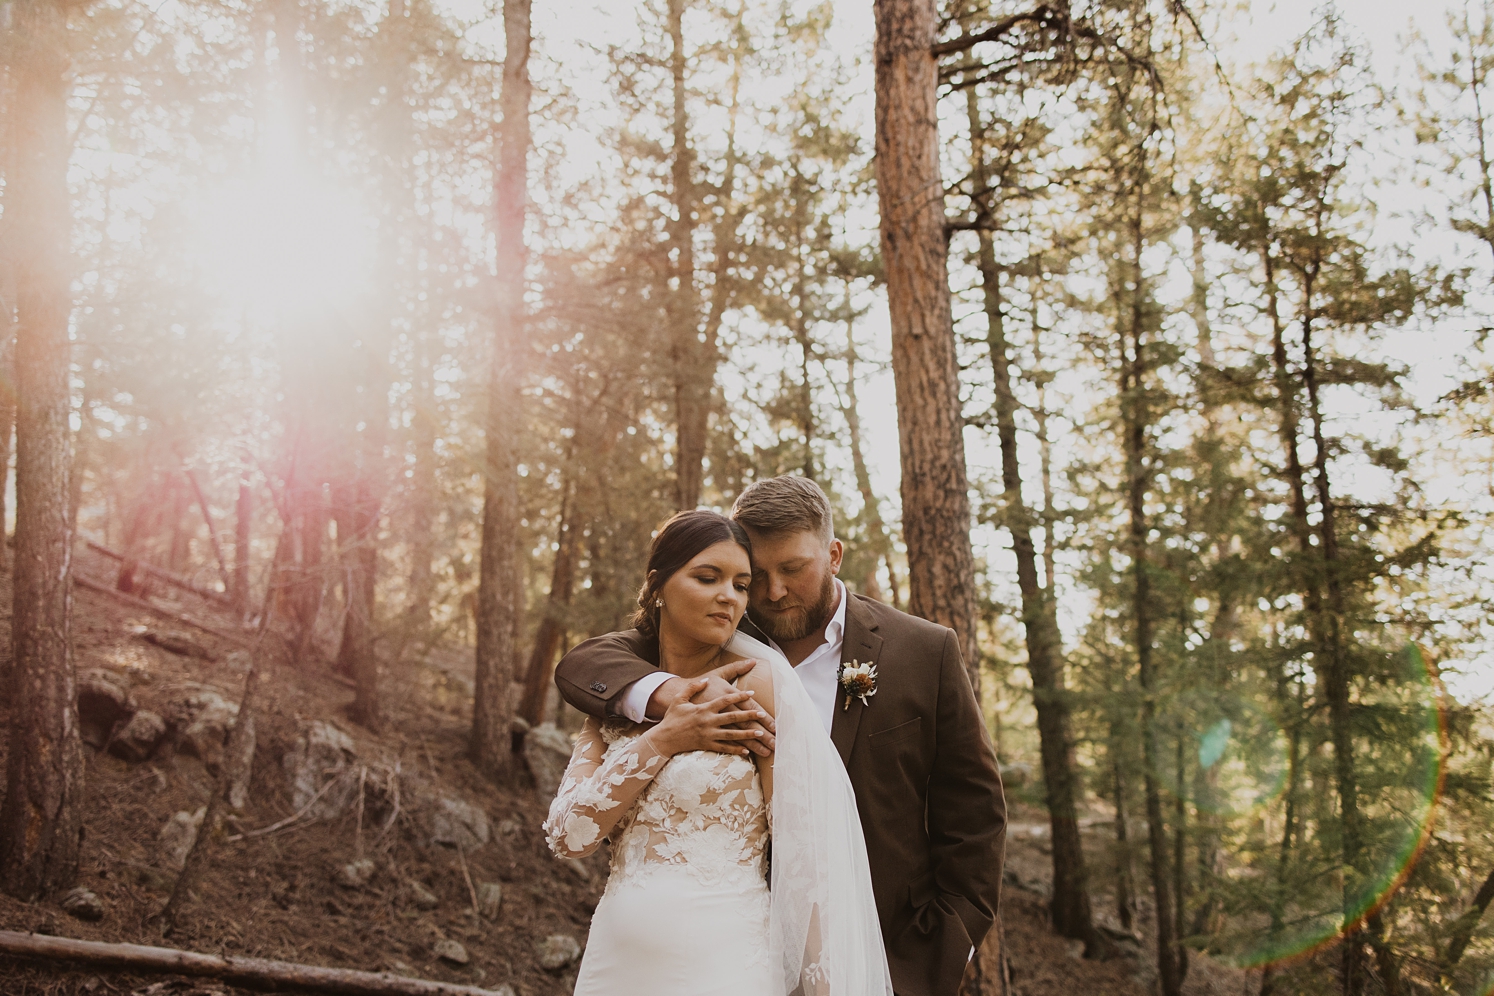 Couple standing in forest at Evergreen wedding venue | McArthur Weddings and Events